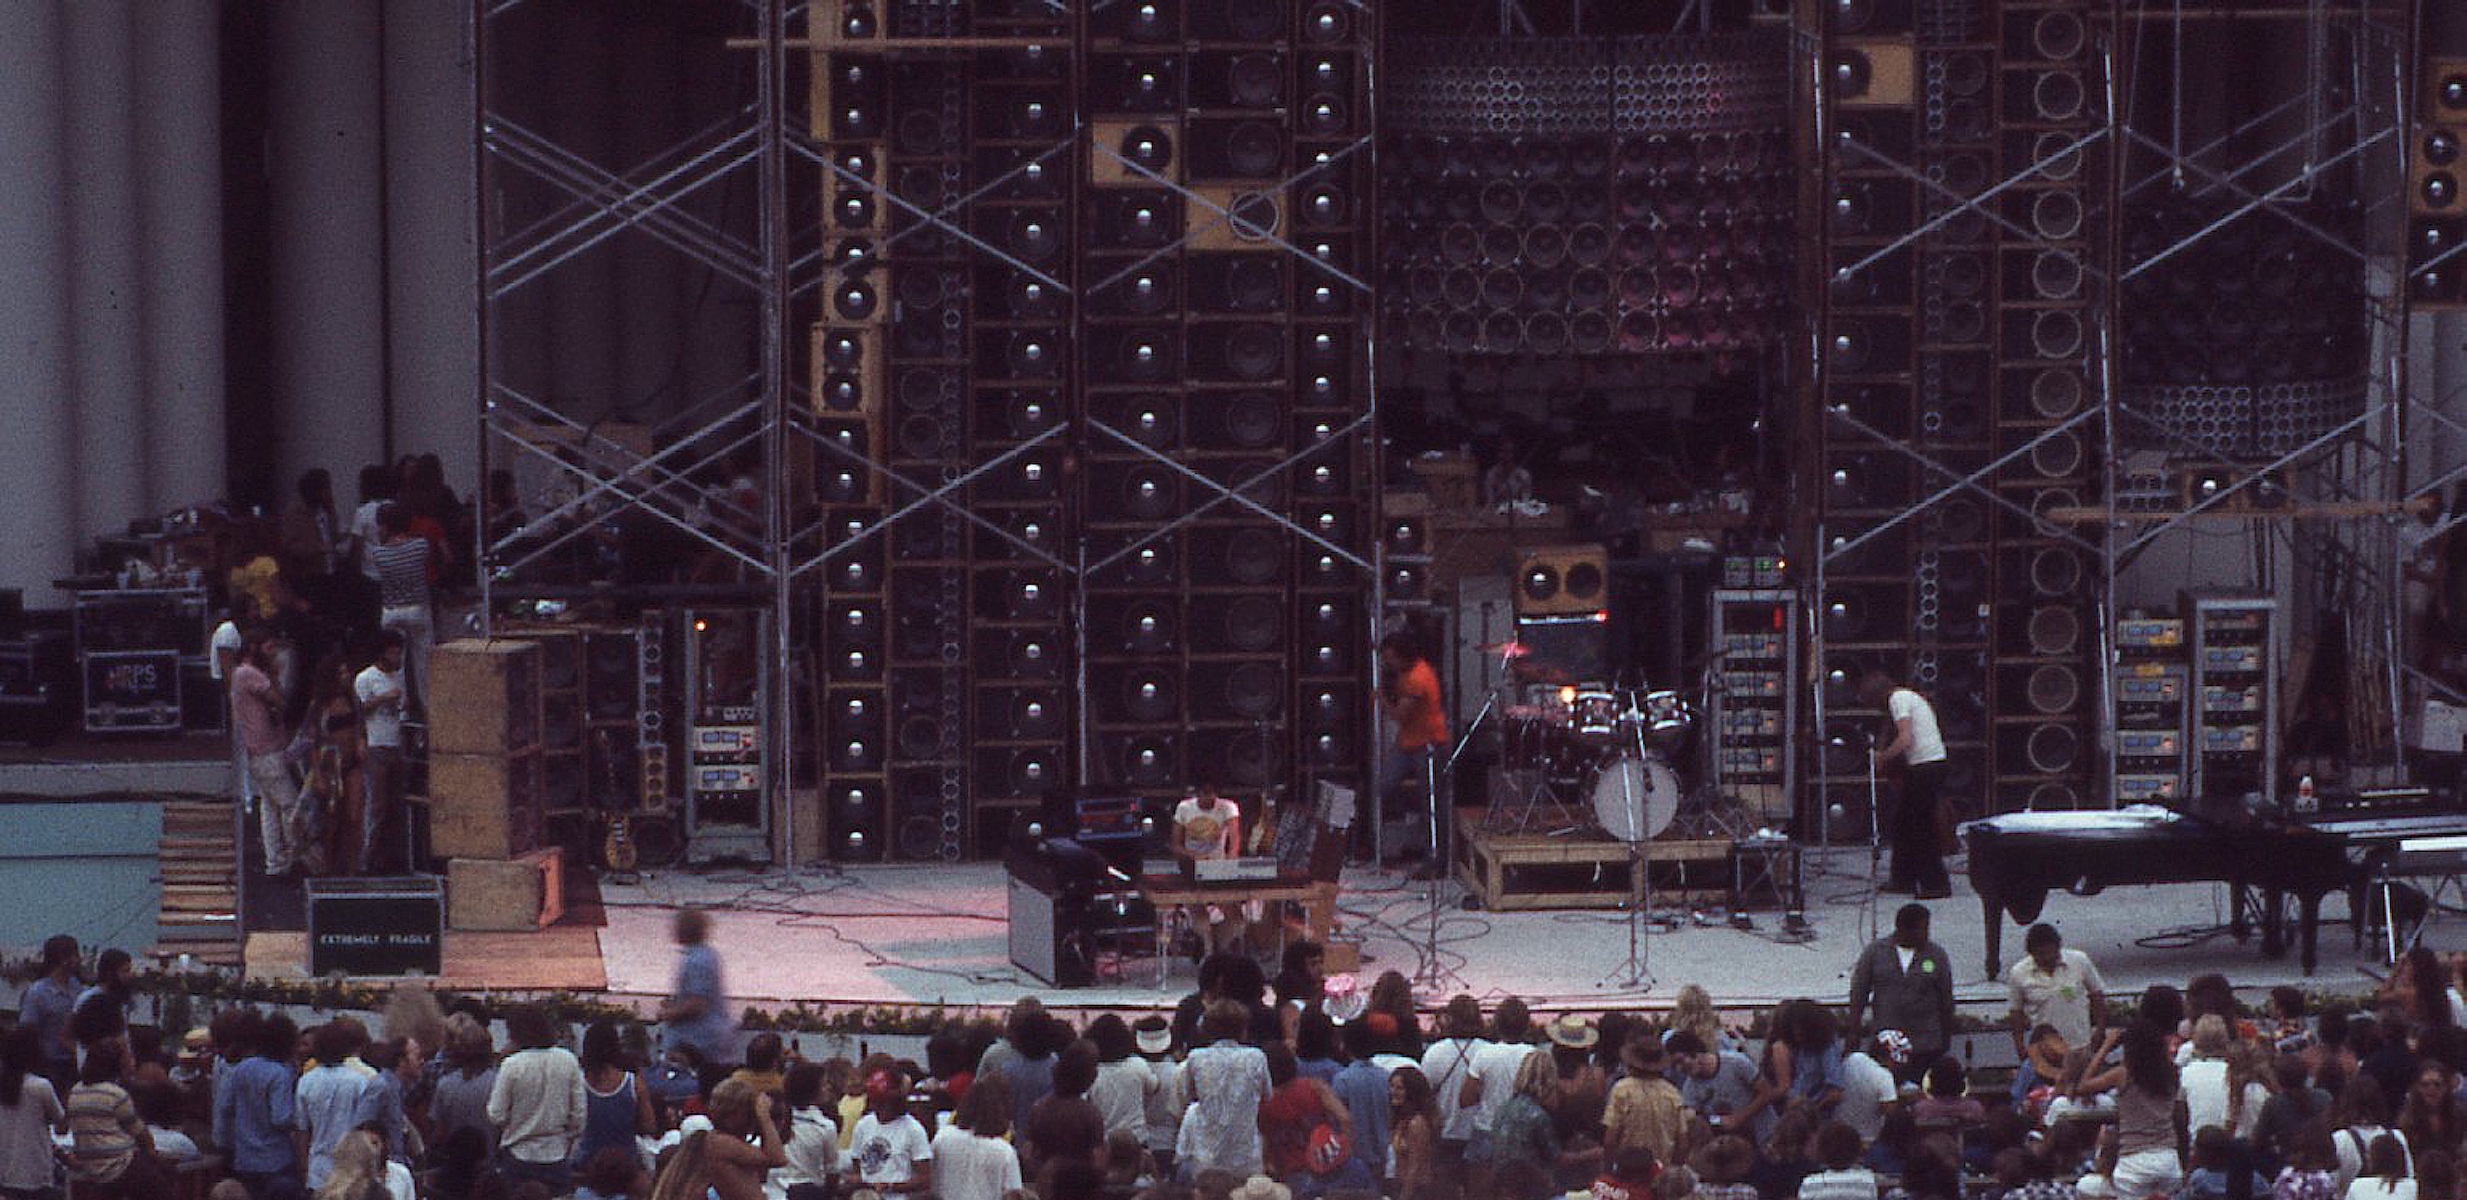 Ned at the Hollywood Bowl soundcheck on July 21, 1974 (photo by Ralph Boethling).